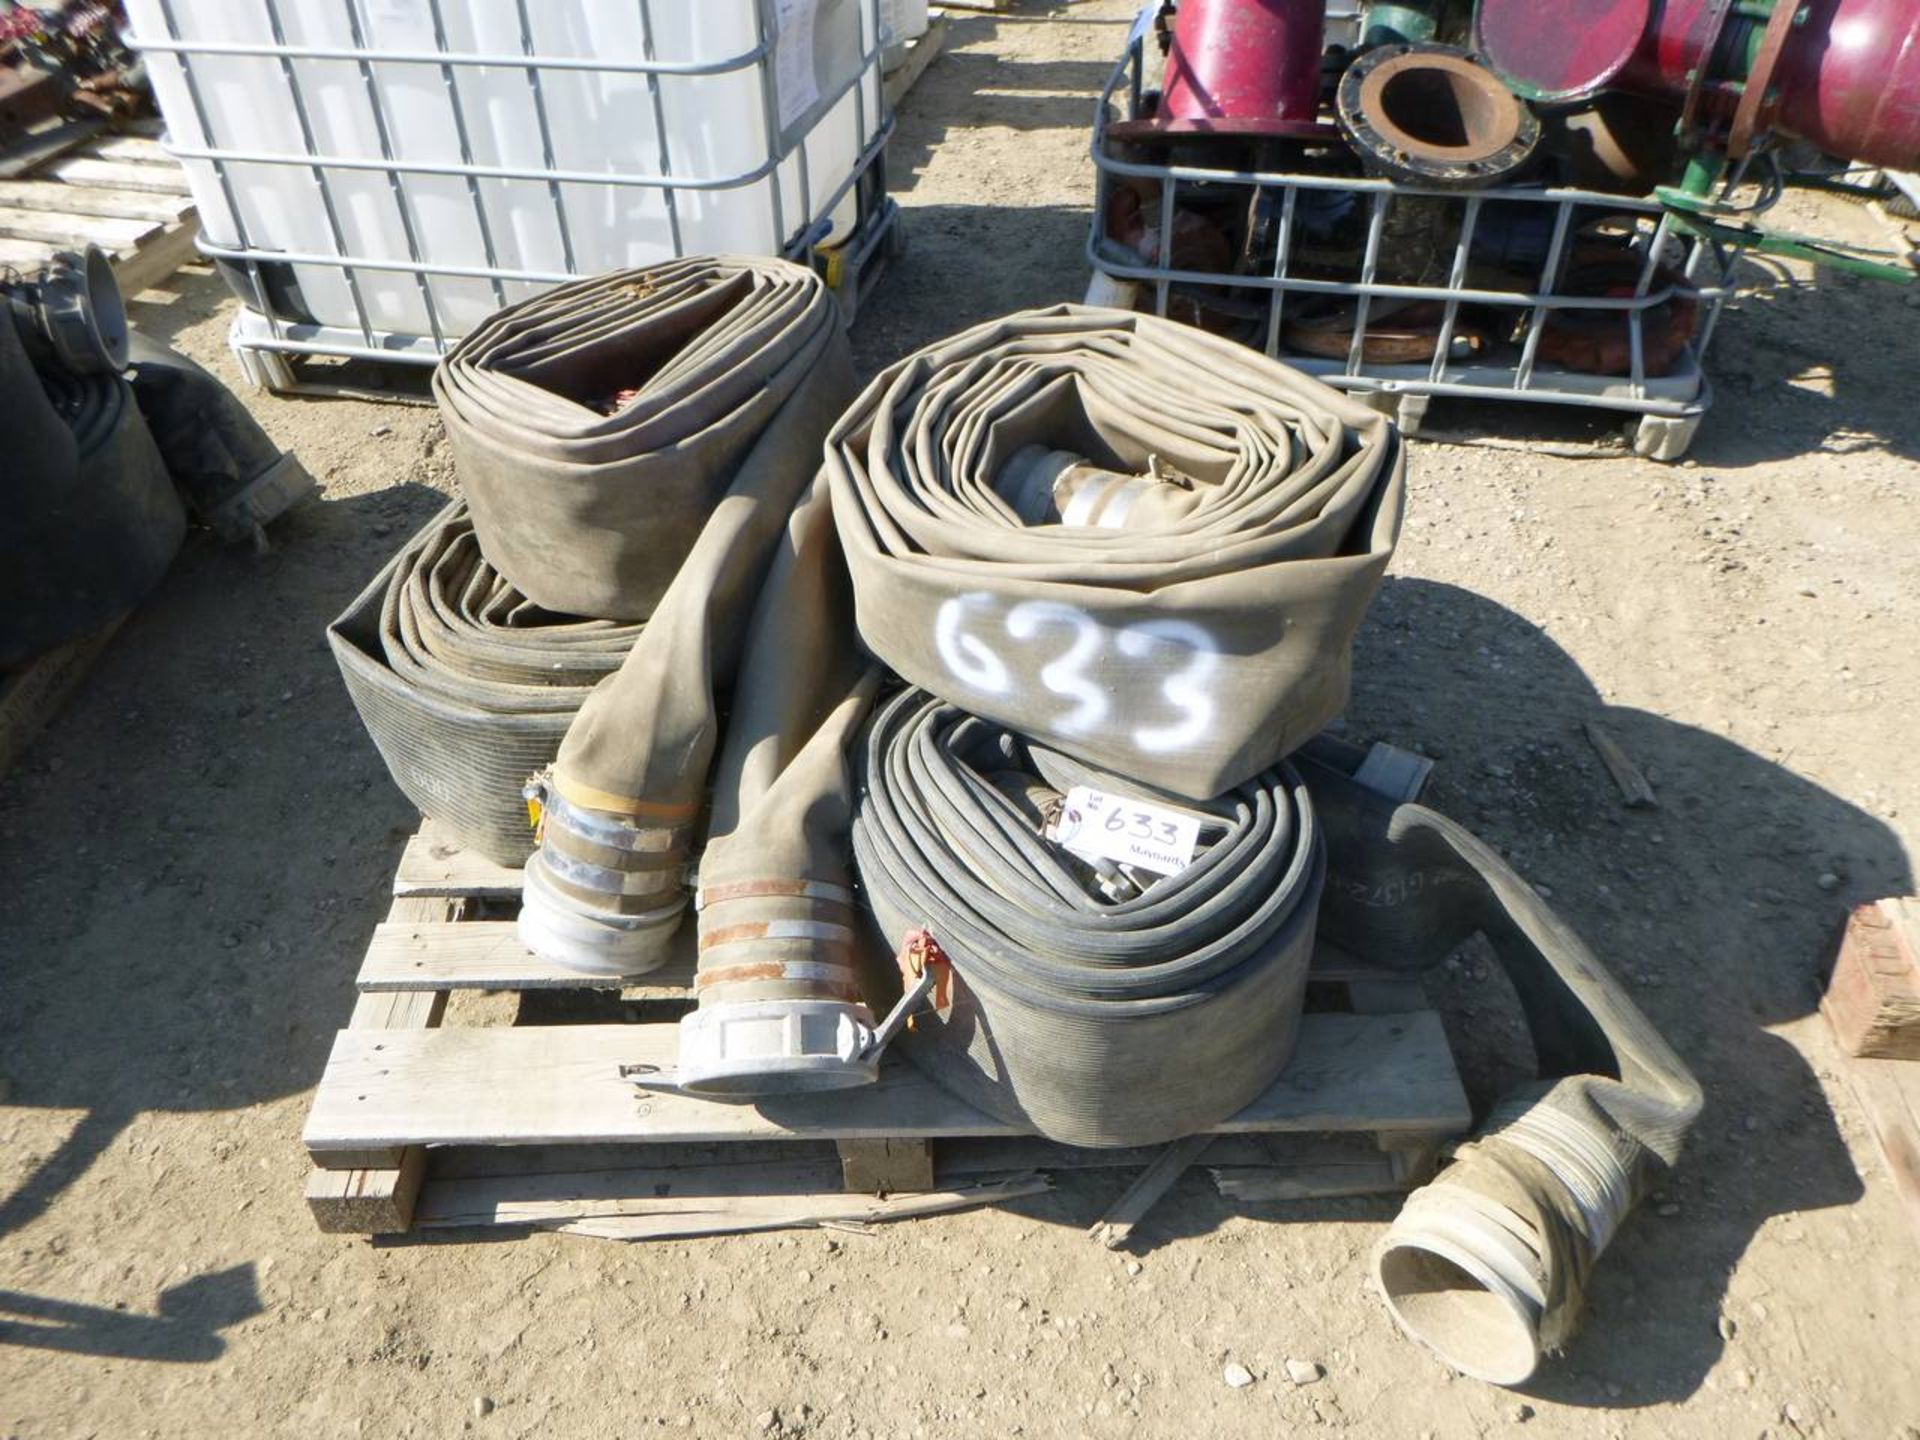 Lot of 6" lay flat hose with fittings